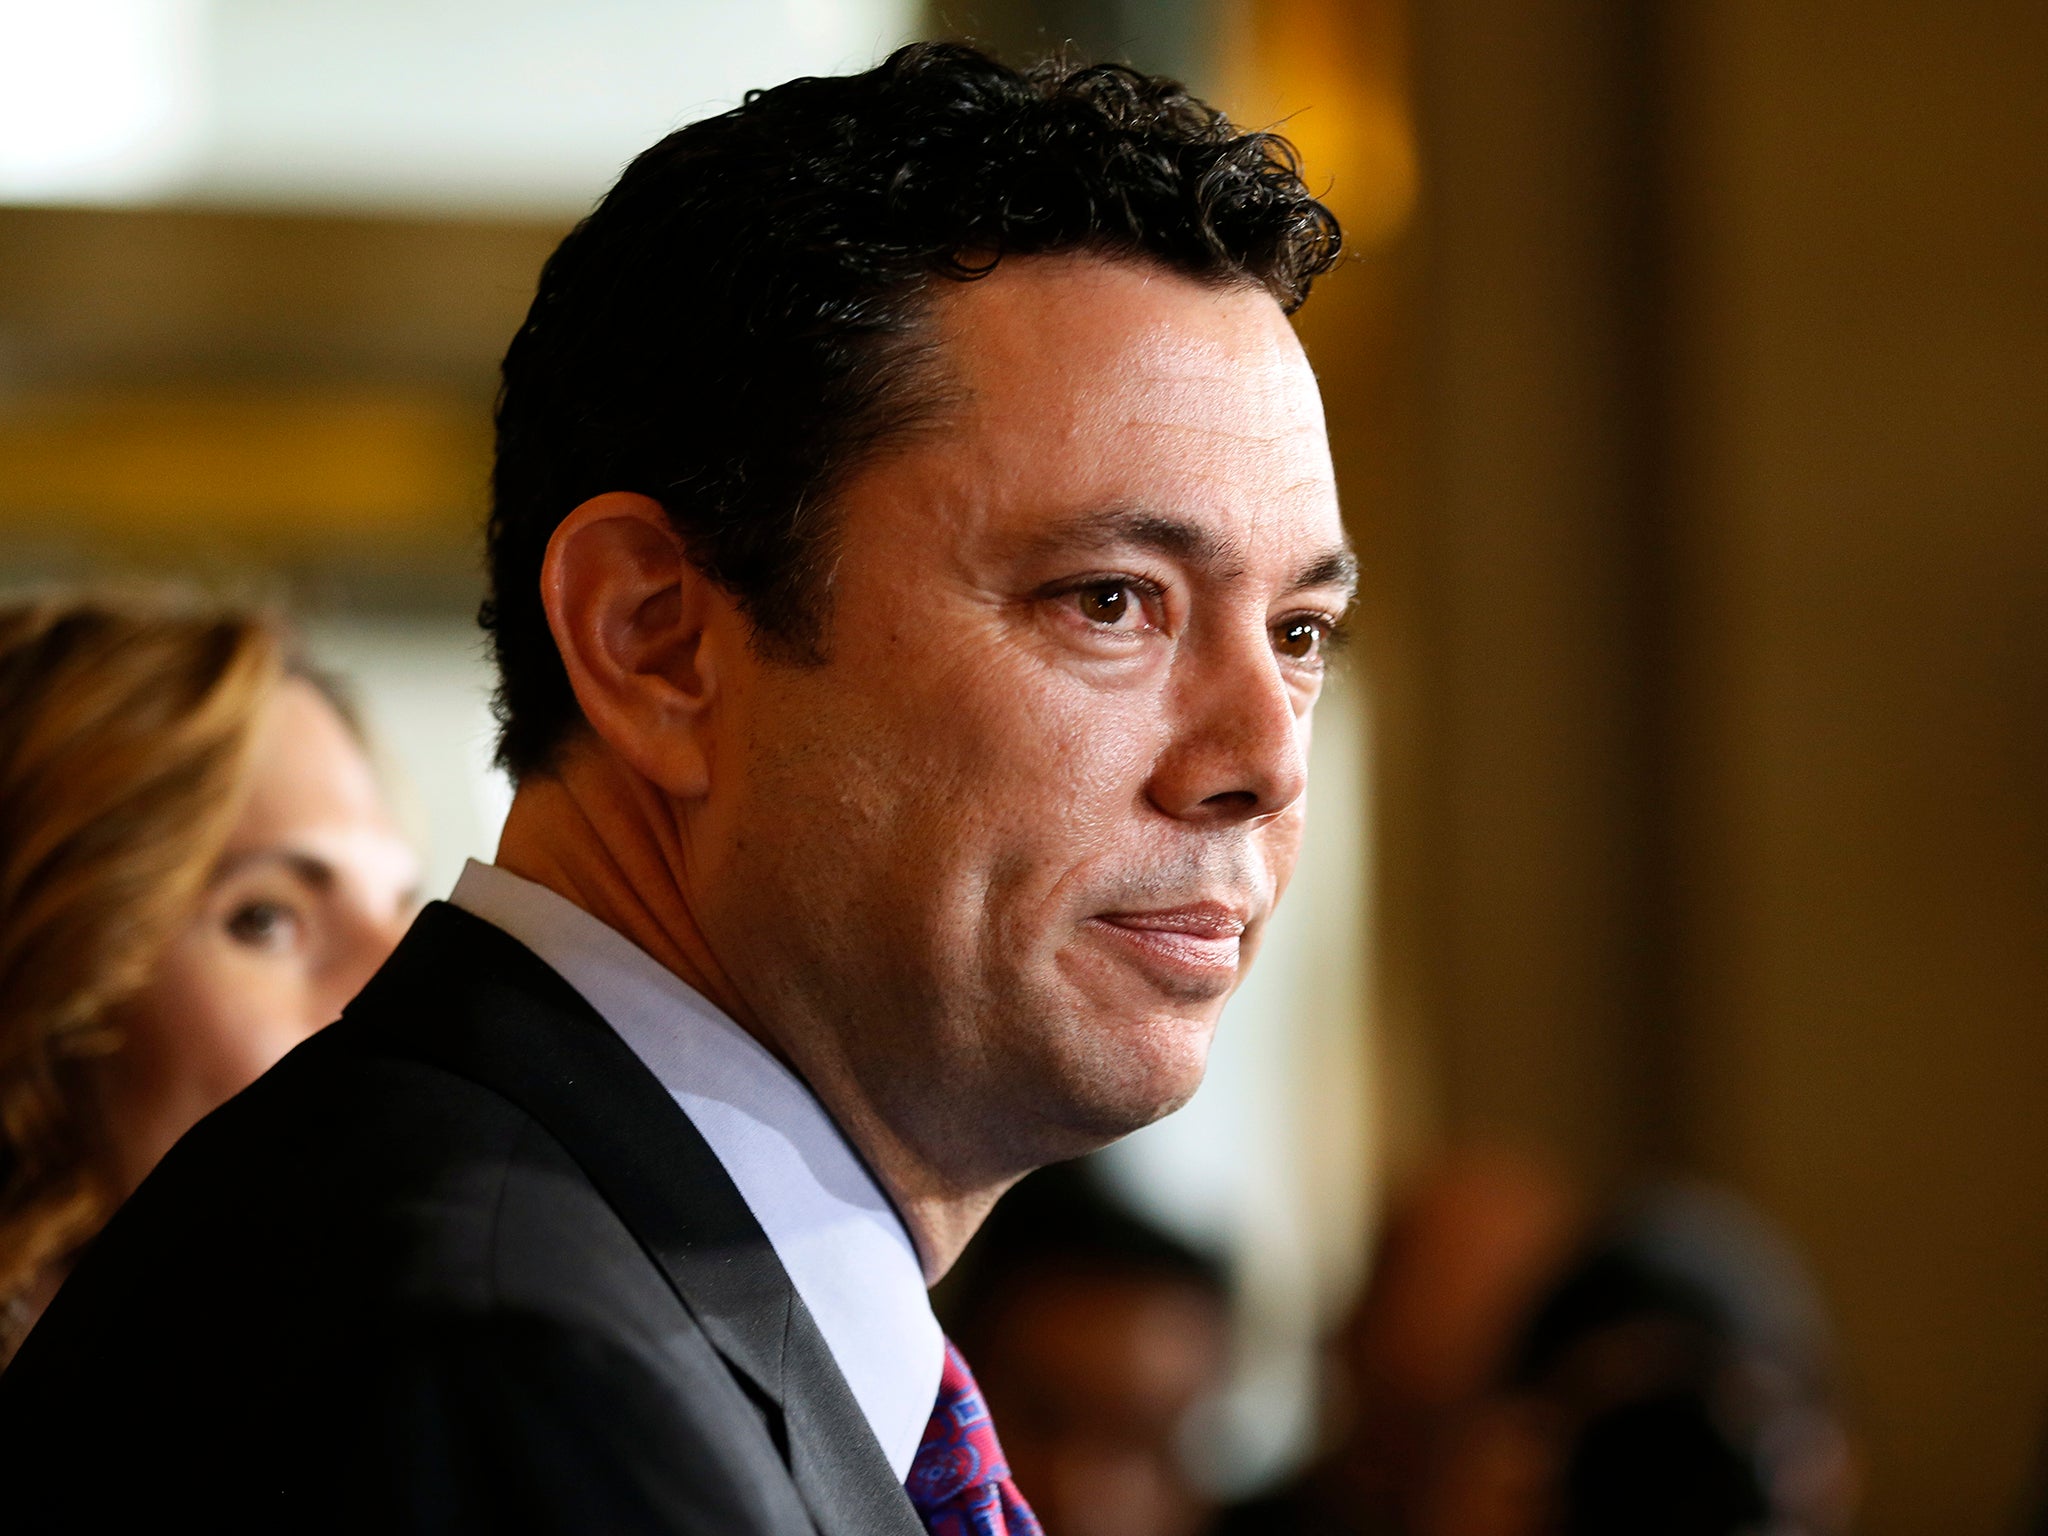 Committee chairman Jason Chaffetz has previously resisted investigating Mr Trump's potential conflicts of interest